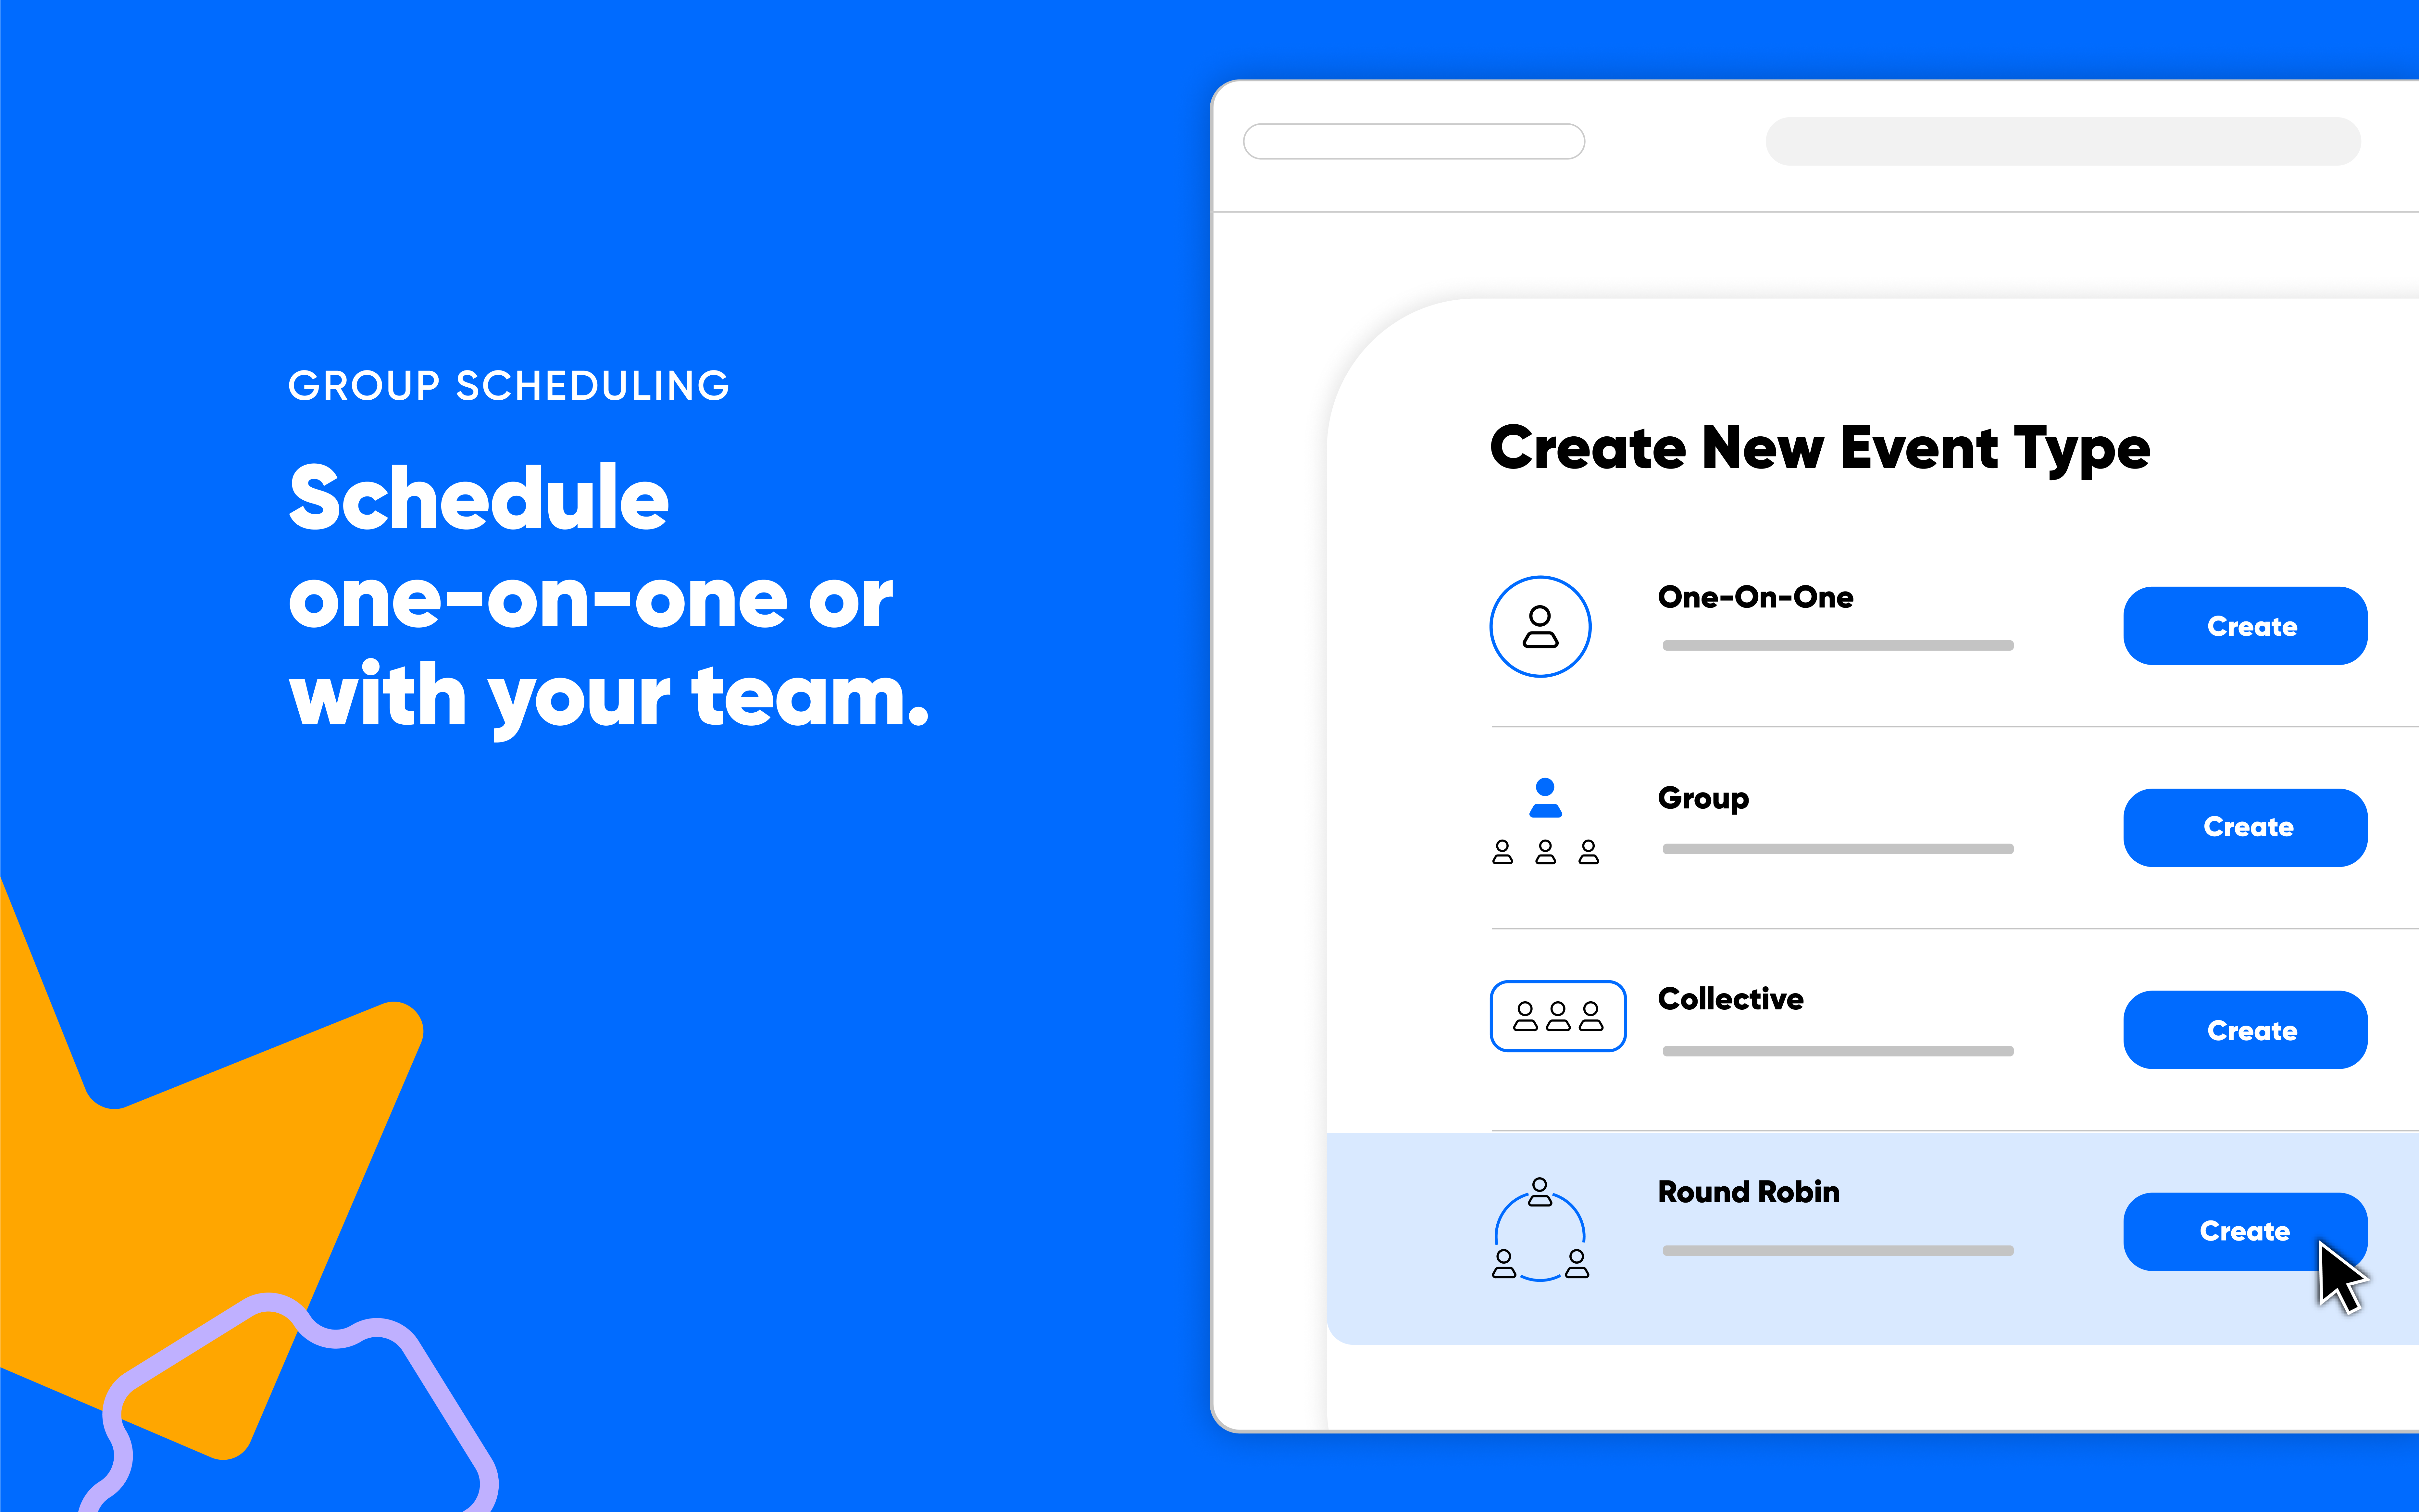 <p style="text-align: center;"><span style="font-weight: 400;">Team-based scheduling in Calendly (</span><a href="https://www.capterra.com/p/148036/Calendly/"><span style="font-weight: 400;">Source</span></a><span style="font-weight: 400;">)</span></p>
